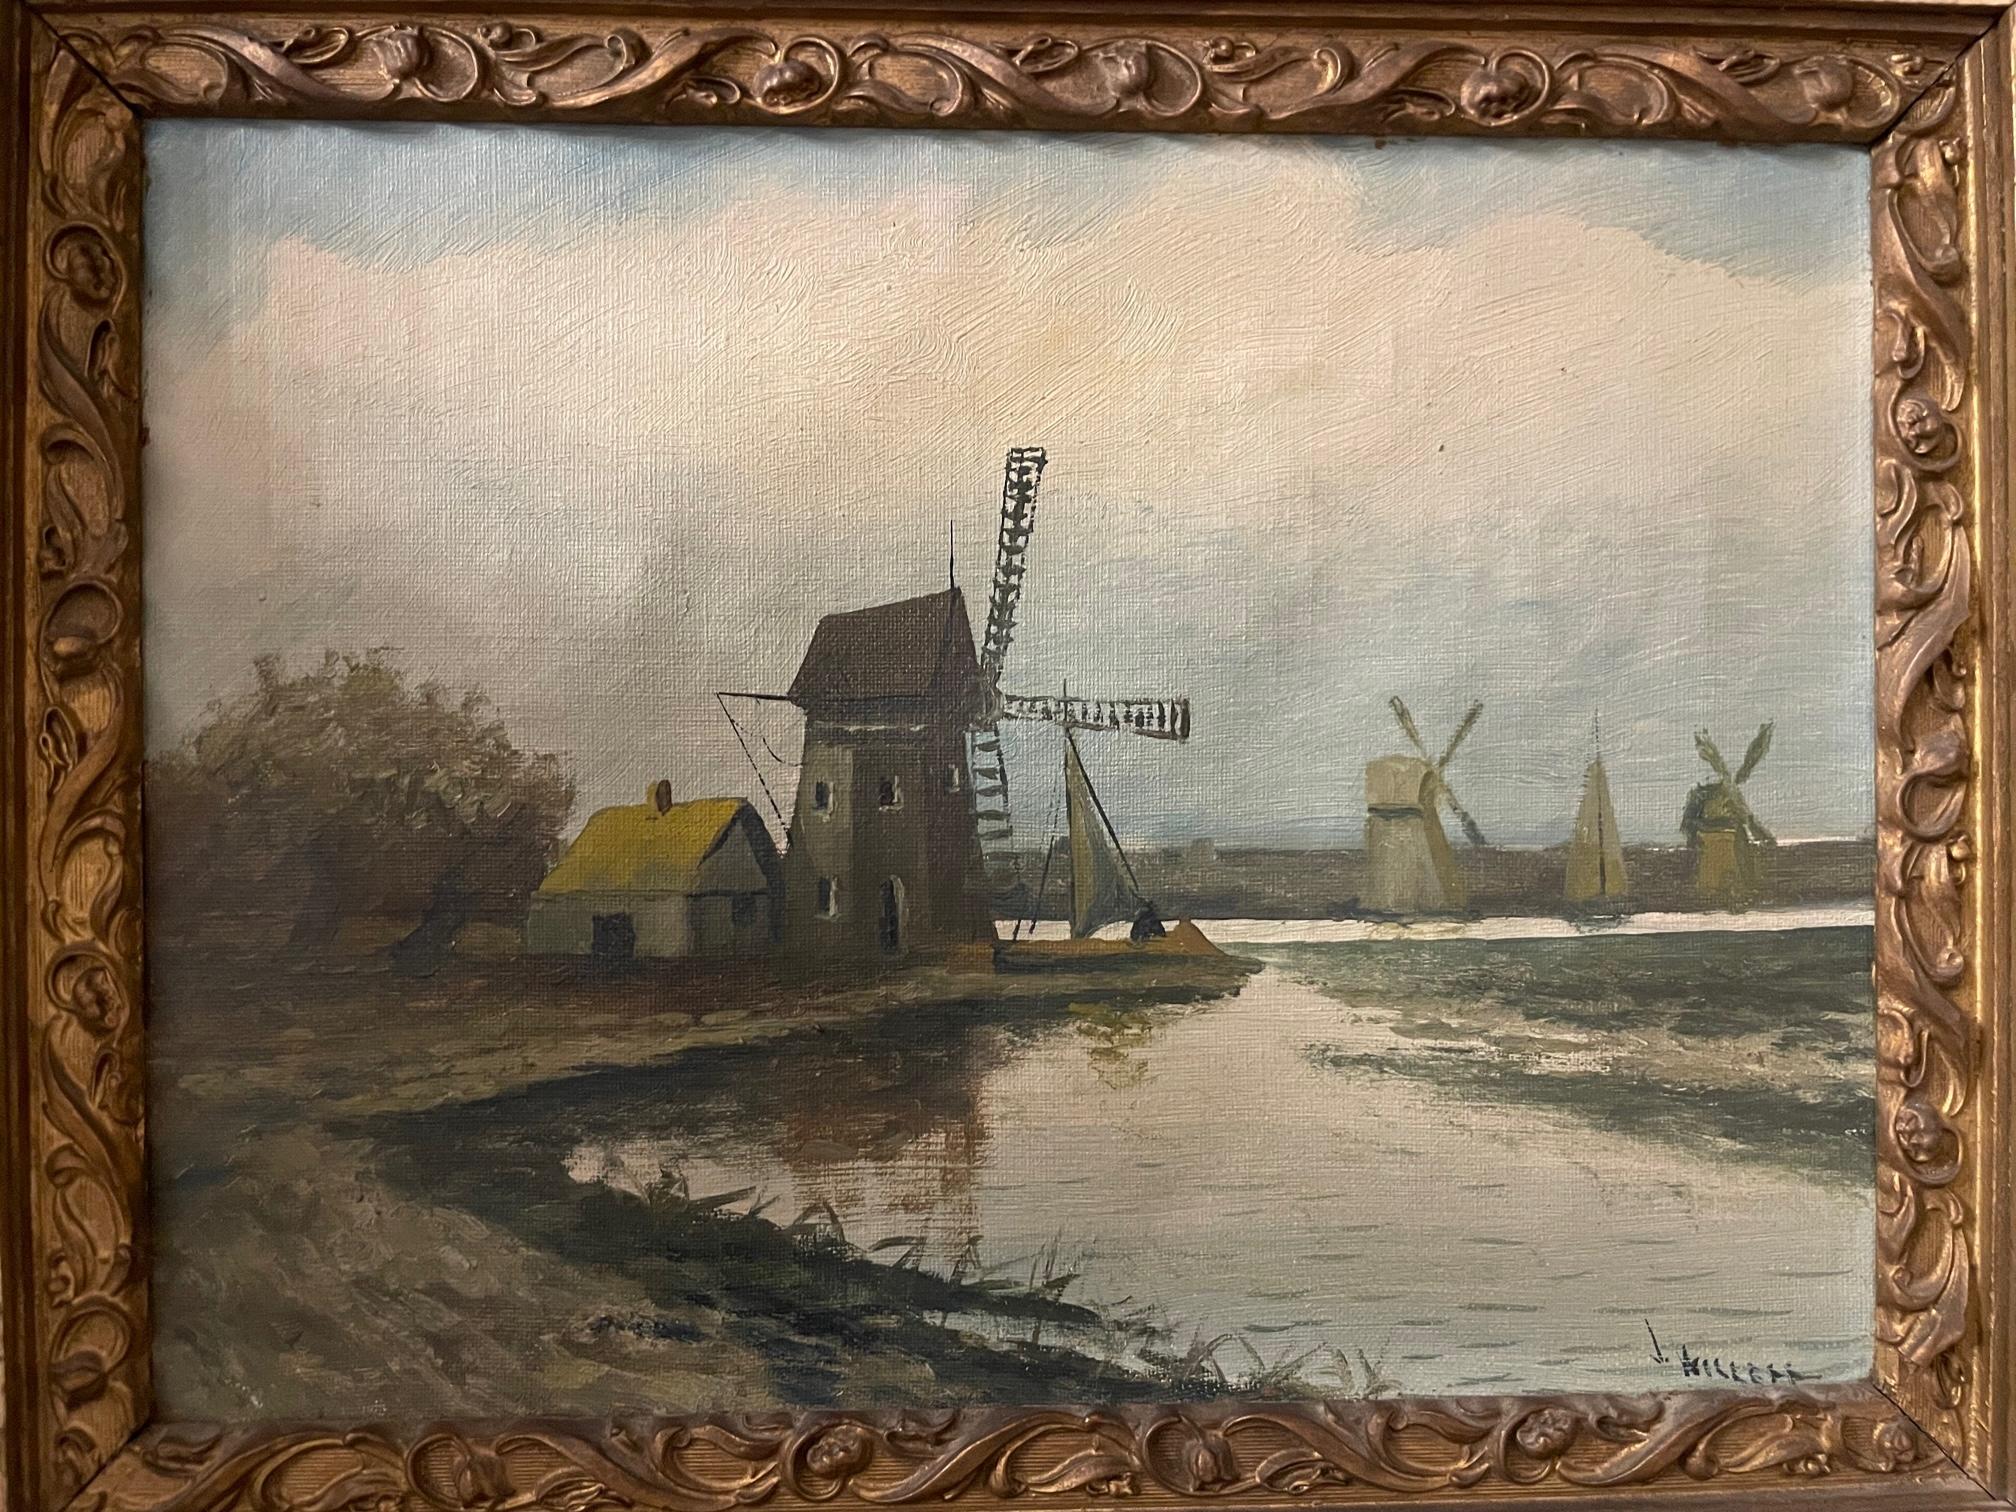  Charming 19th century/20th century oil on canvas painting in carved wooden frame, signed A. Willett in lower right corner. Arthur Willett (1868-1951) is known for his landscape paintings in both watercolor and oil, many of a similar size.  Pleasant